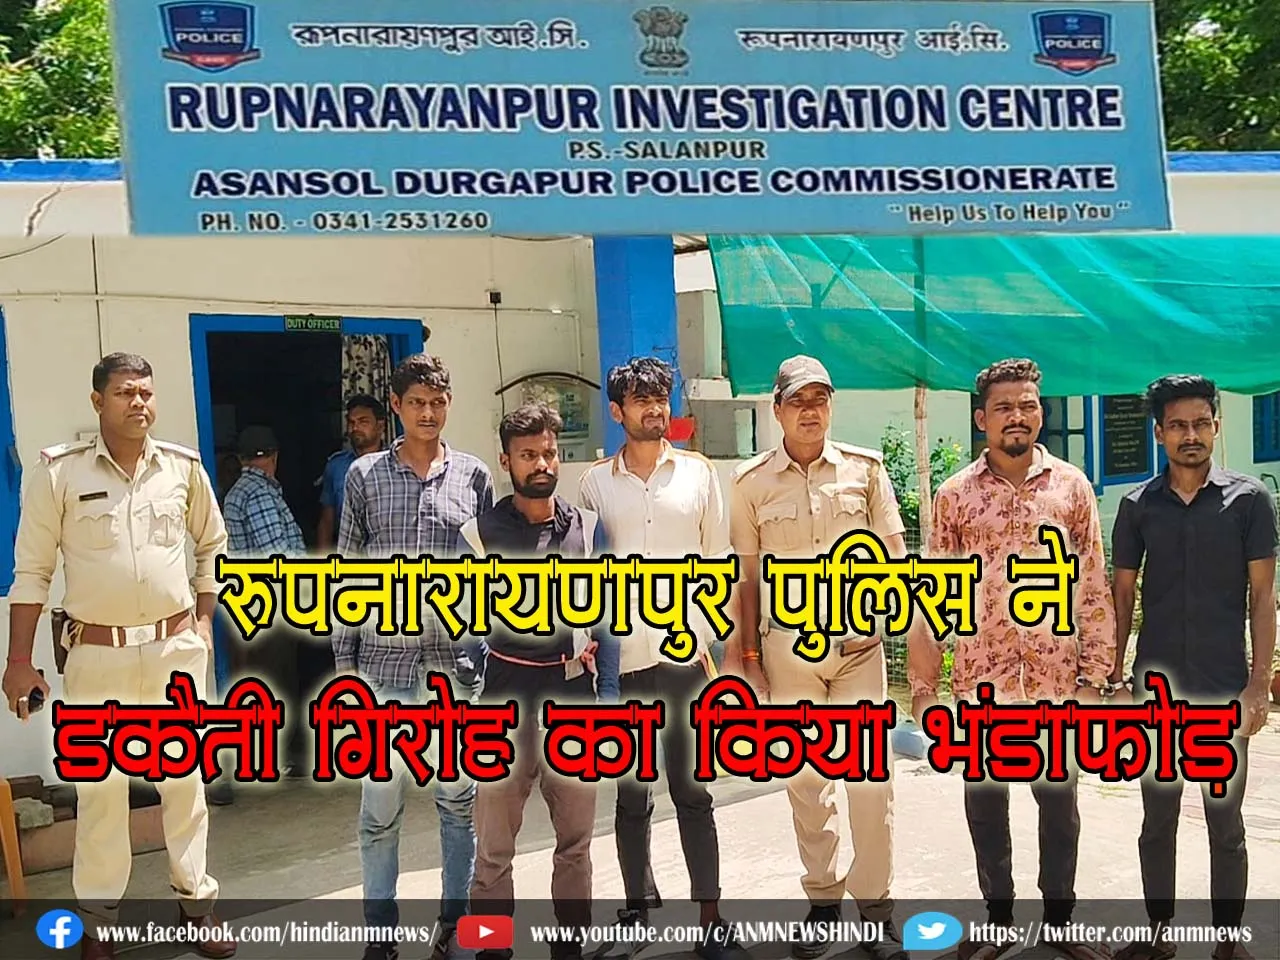 Robbery at rupnayanpur